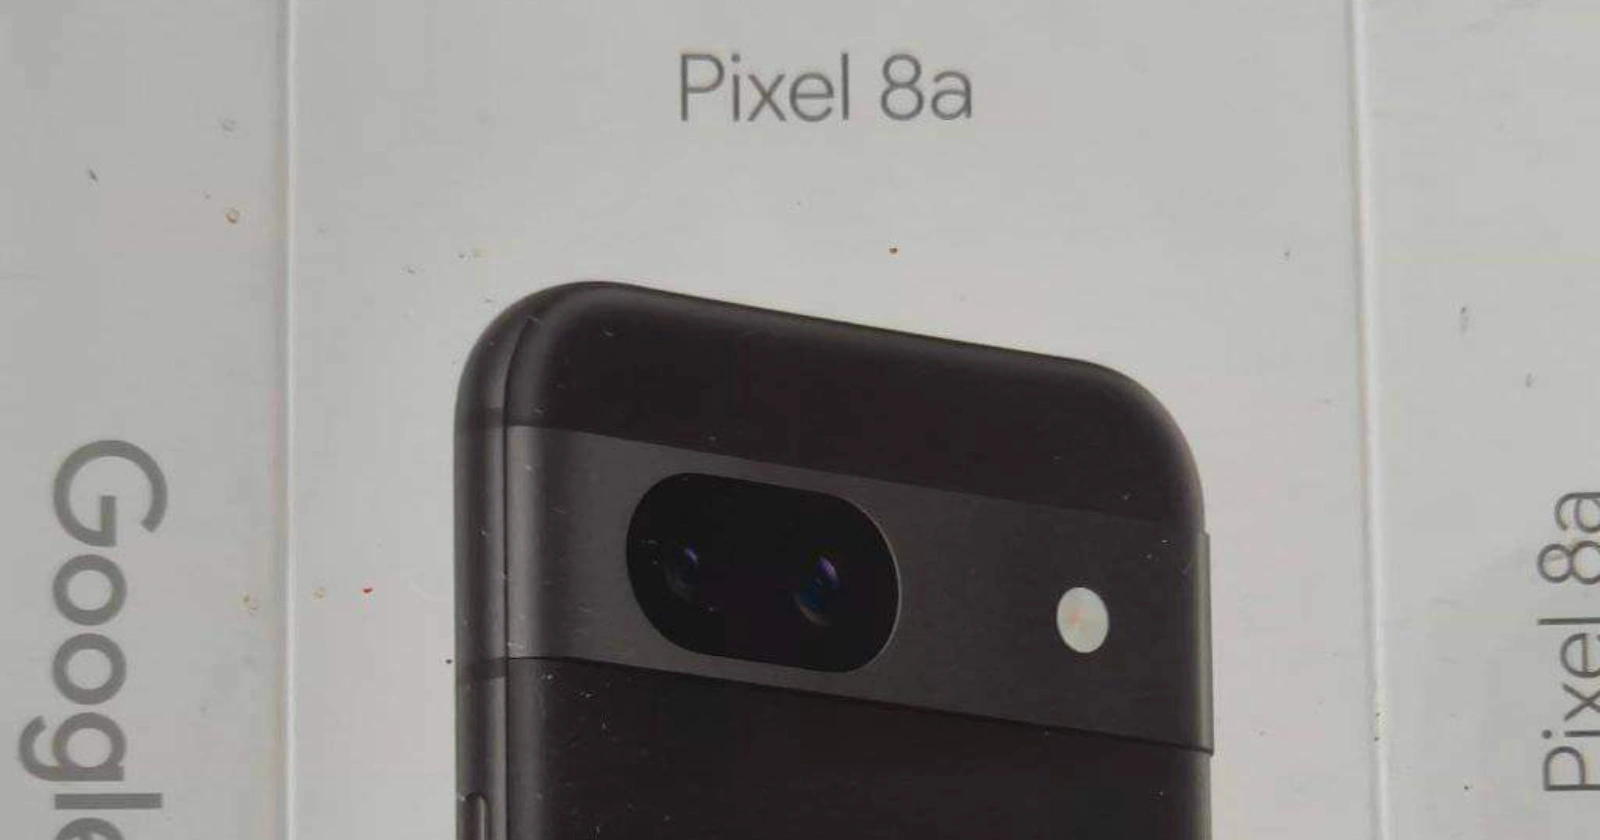 Google Pixel 8a might launch with a bump in price